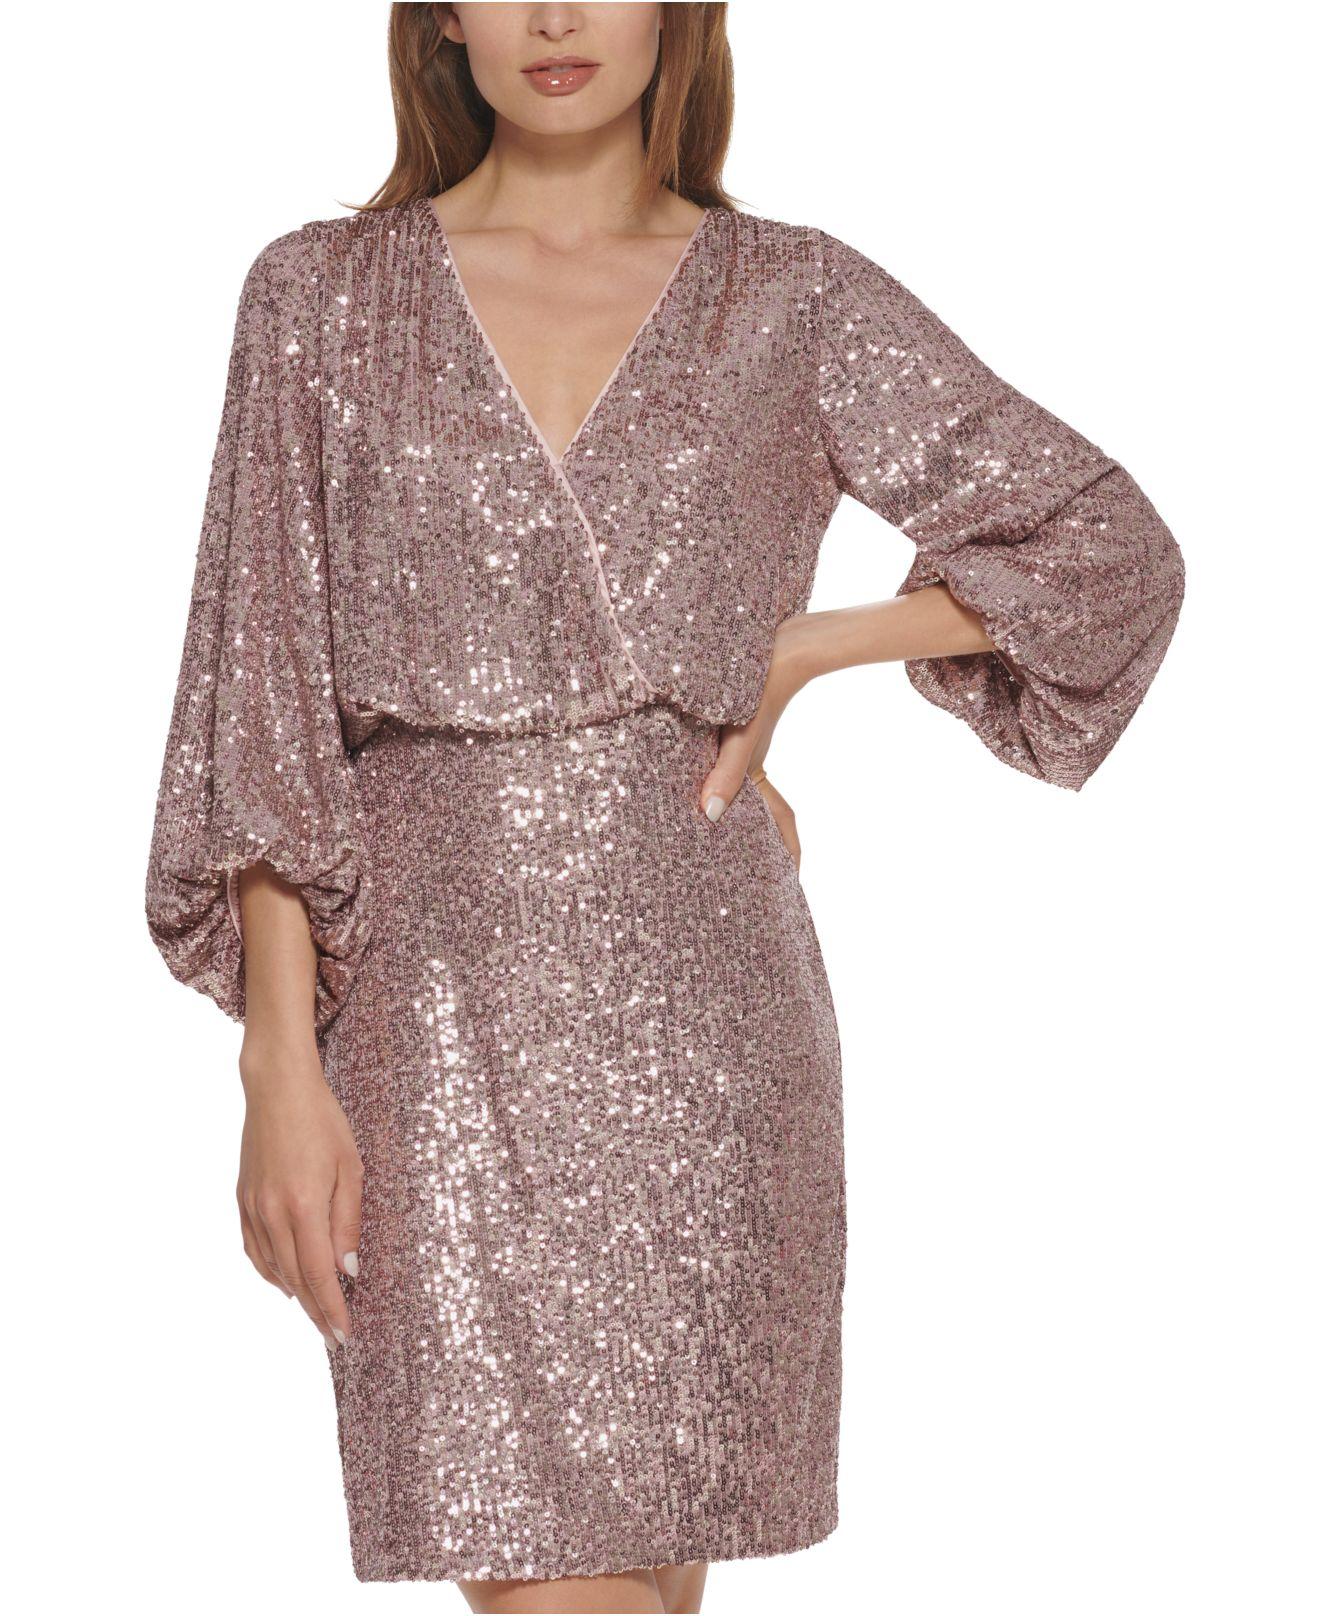 Synthetic Sequined Blouson Shift Dress ...